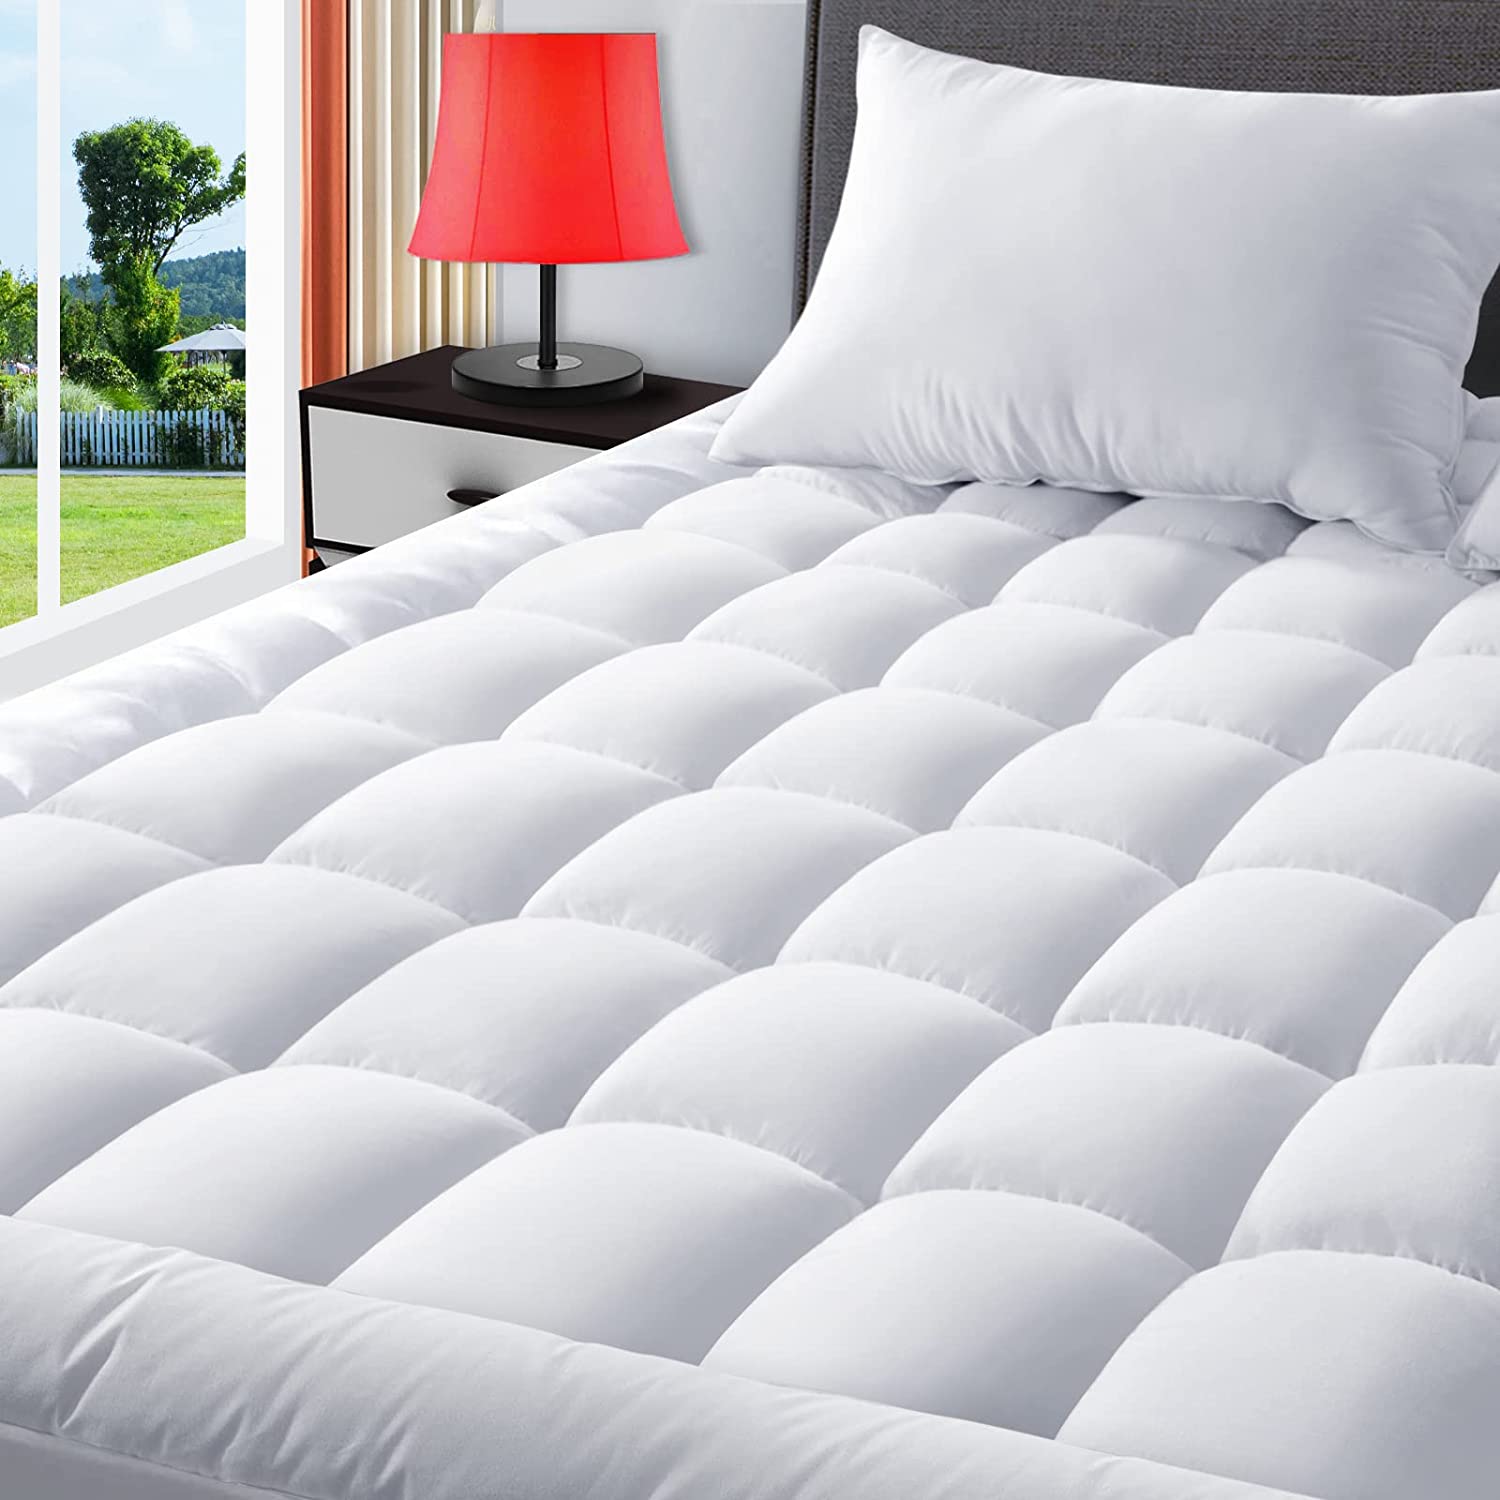 TEXARTIST Breathable Pillow Top Cooling Mattress Topper